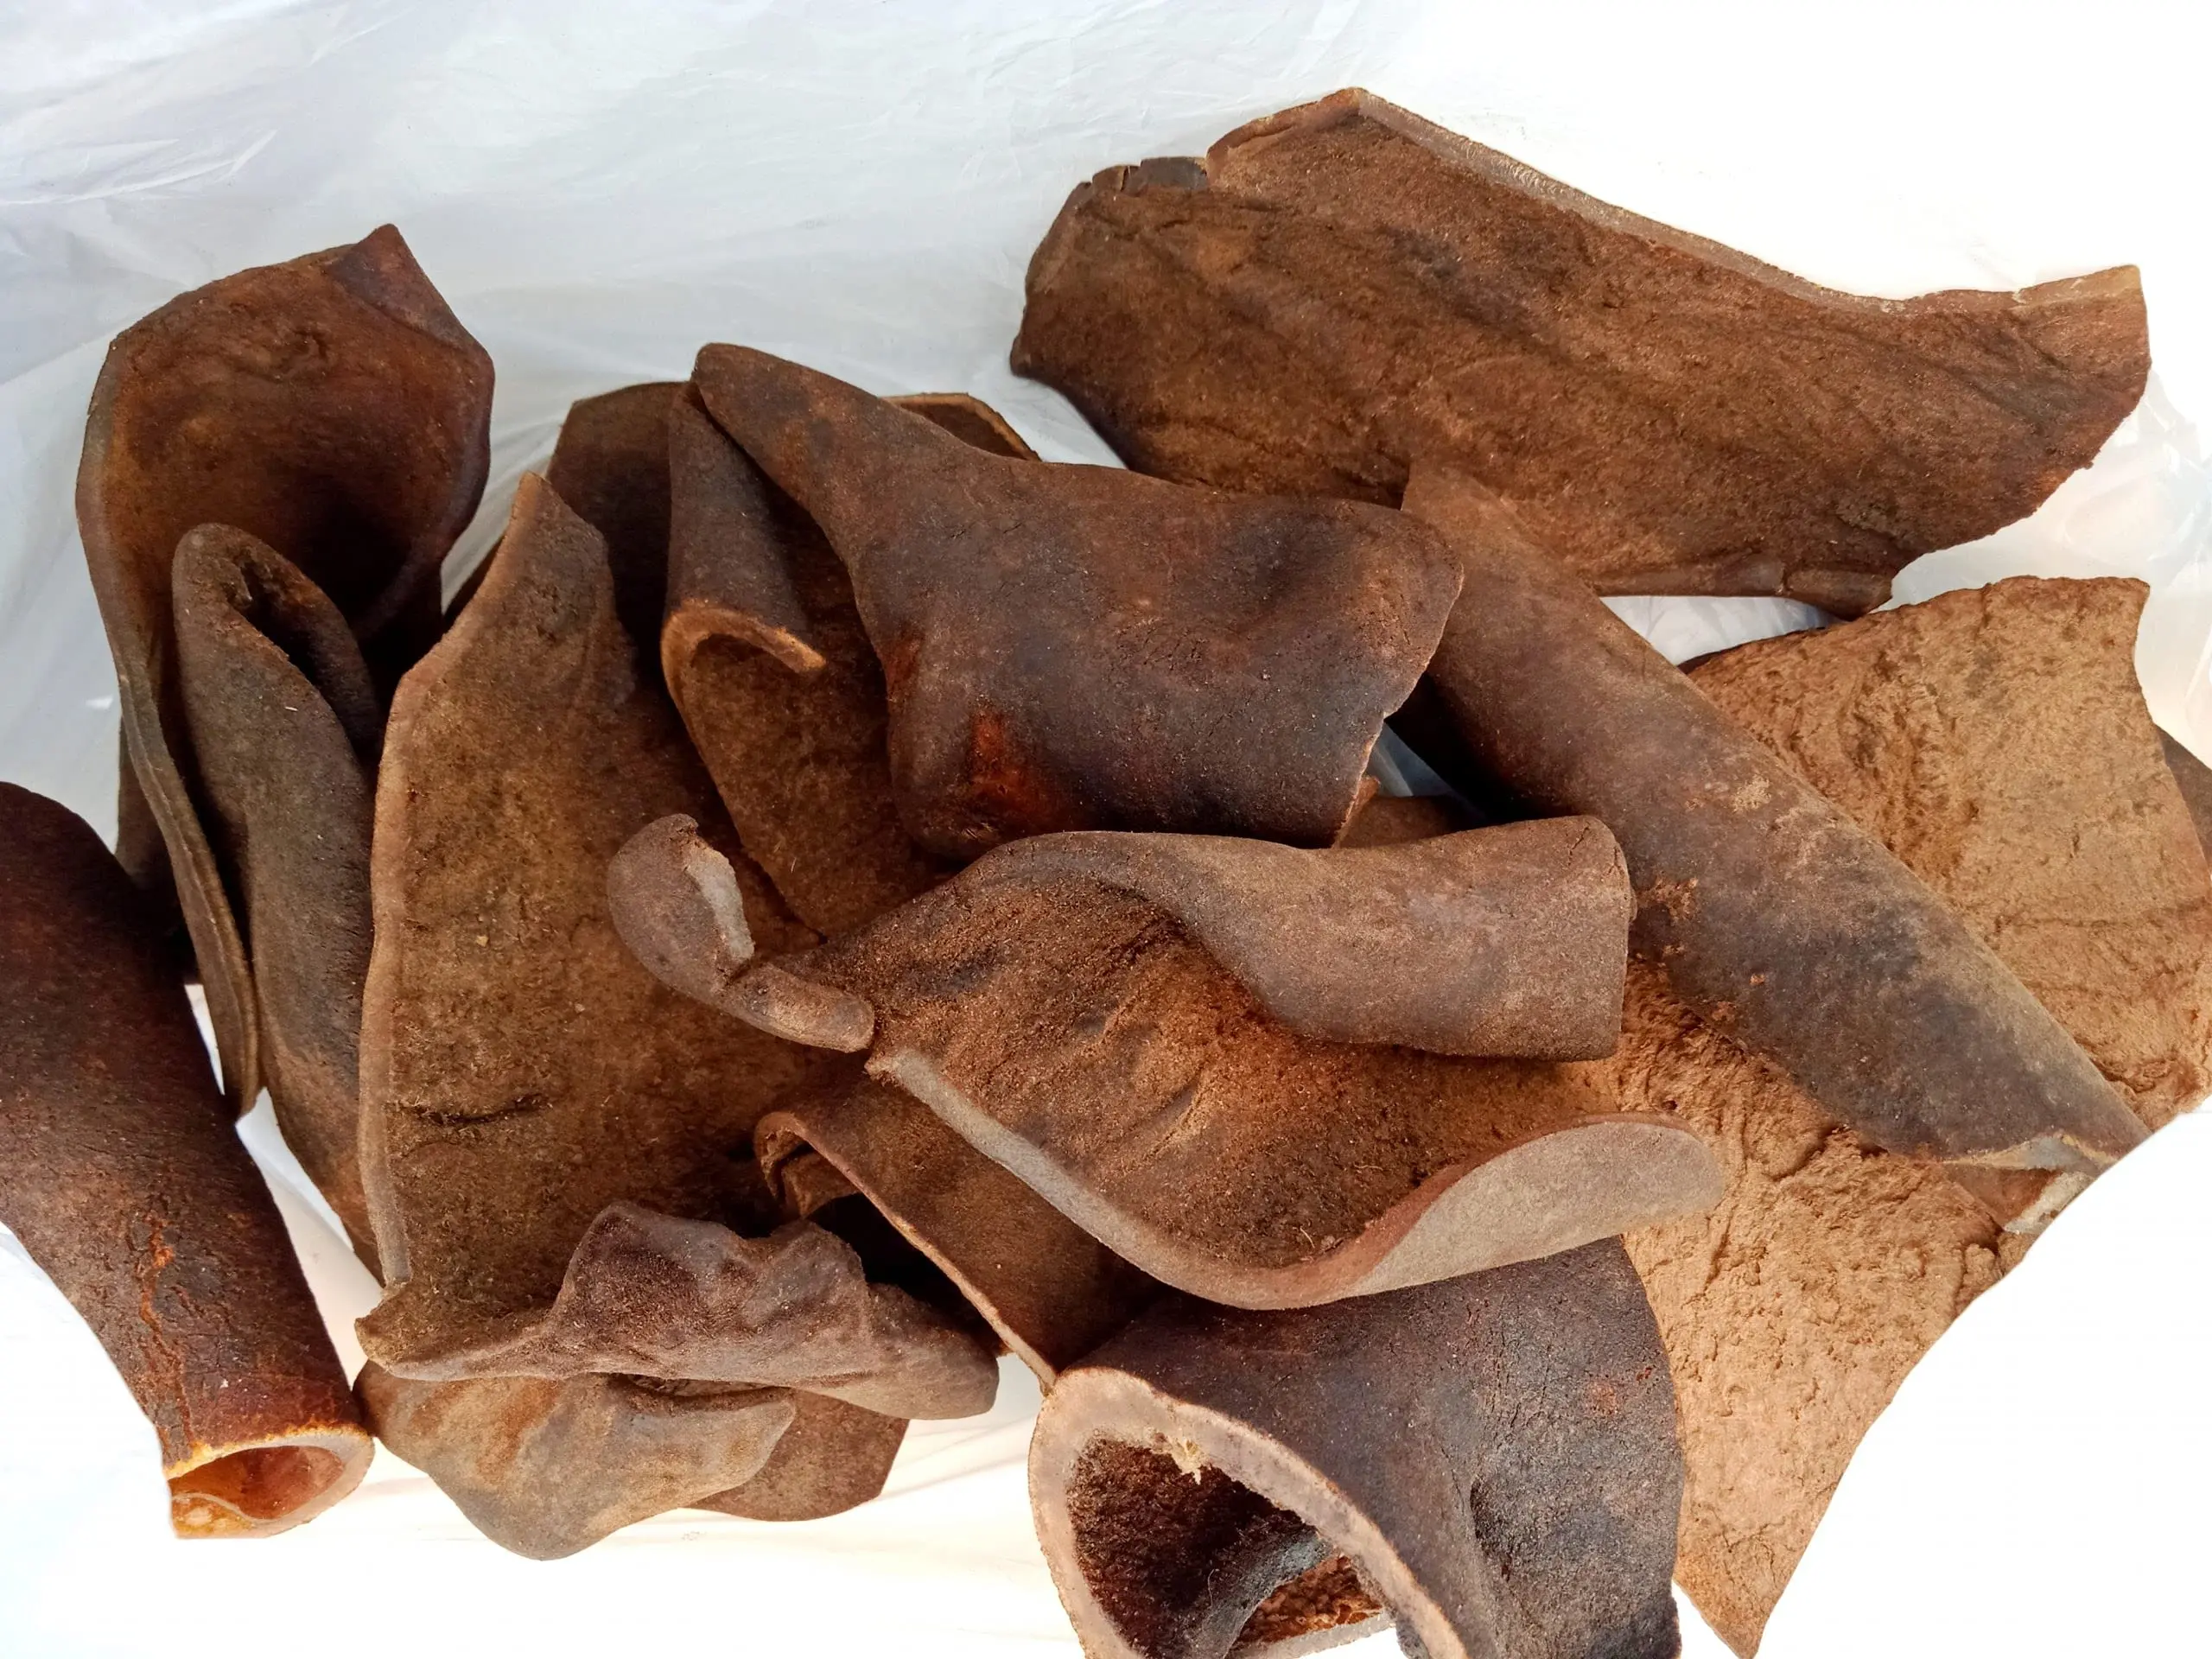 smoked cow skin - Is cow skin healthy to eat